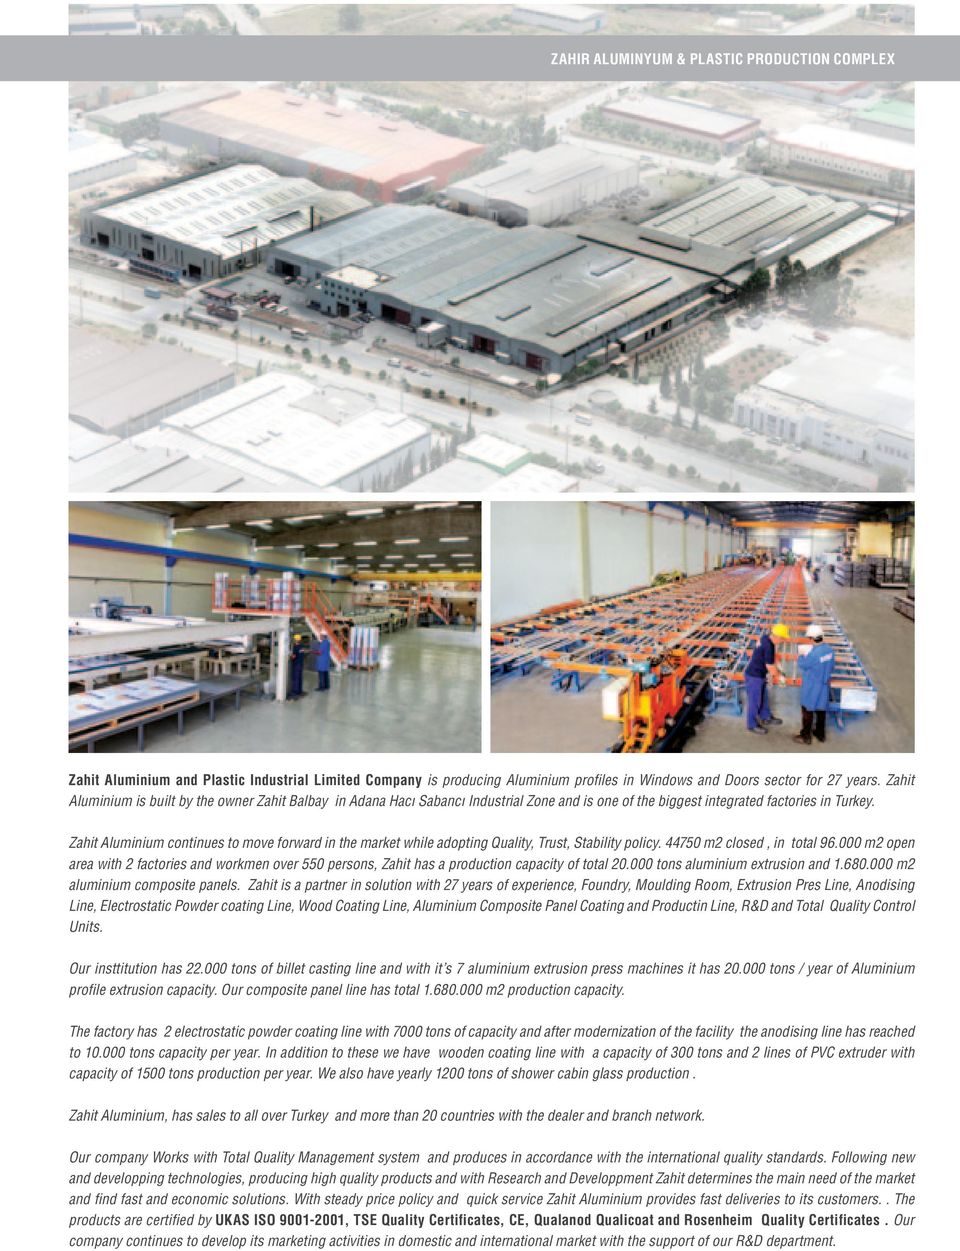 Zahit Aluminium continues to move forward in the market while adopting Quality, Trust, Stability policy. 44750 m2 closed, in total 96.